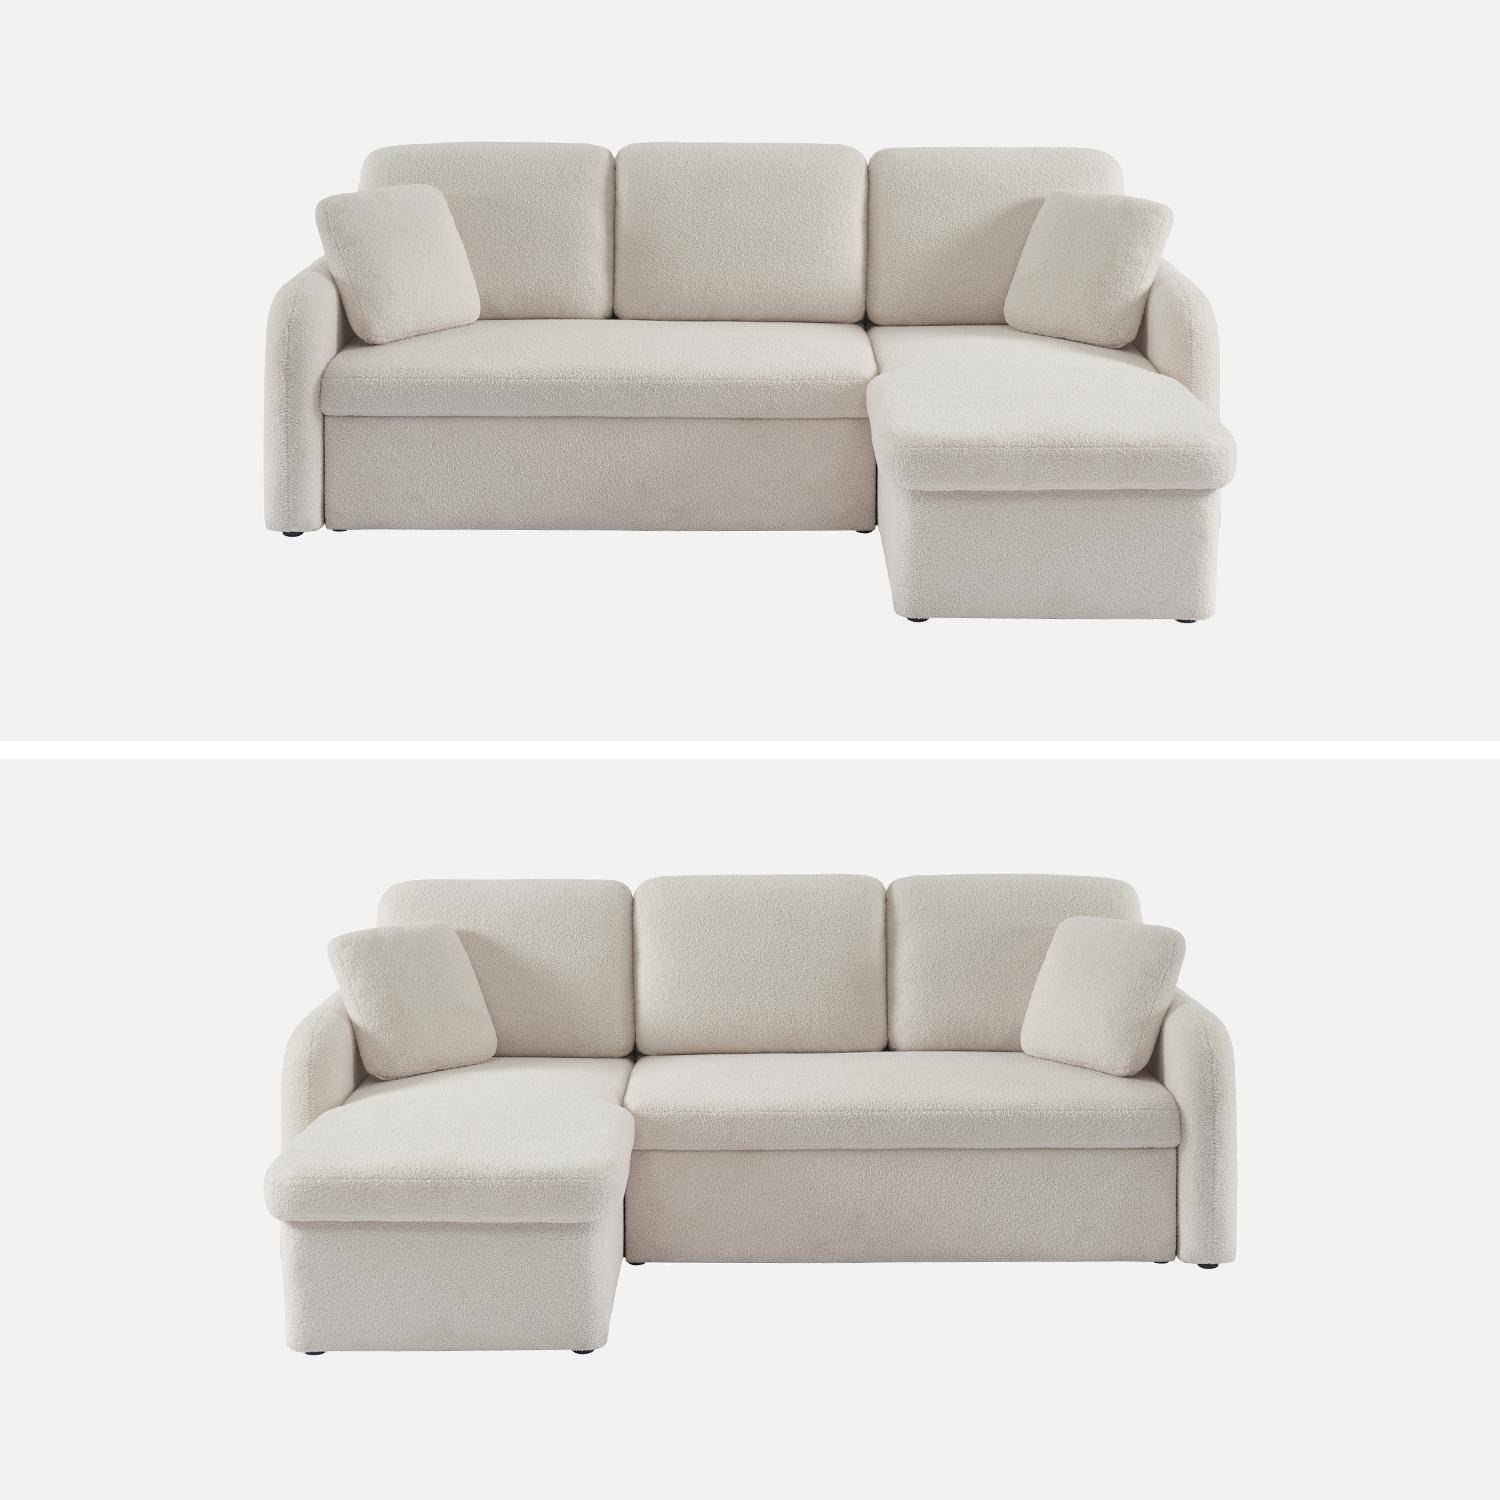 3-seater reversible corner sofa bed with storage box - Milano, Ecru, boucle fabric, rounded lines,sweeek,Photo5